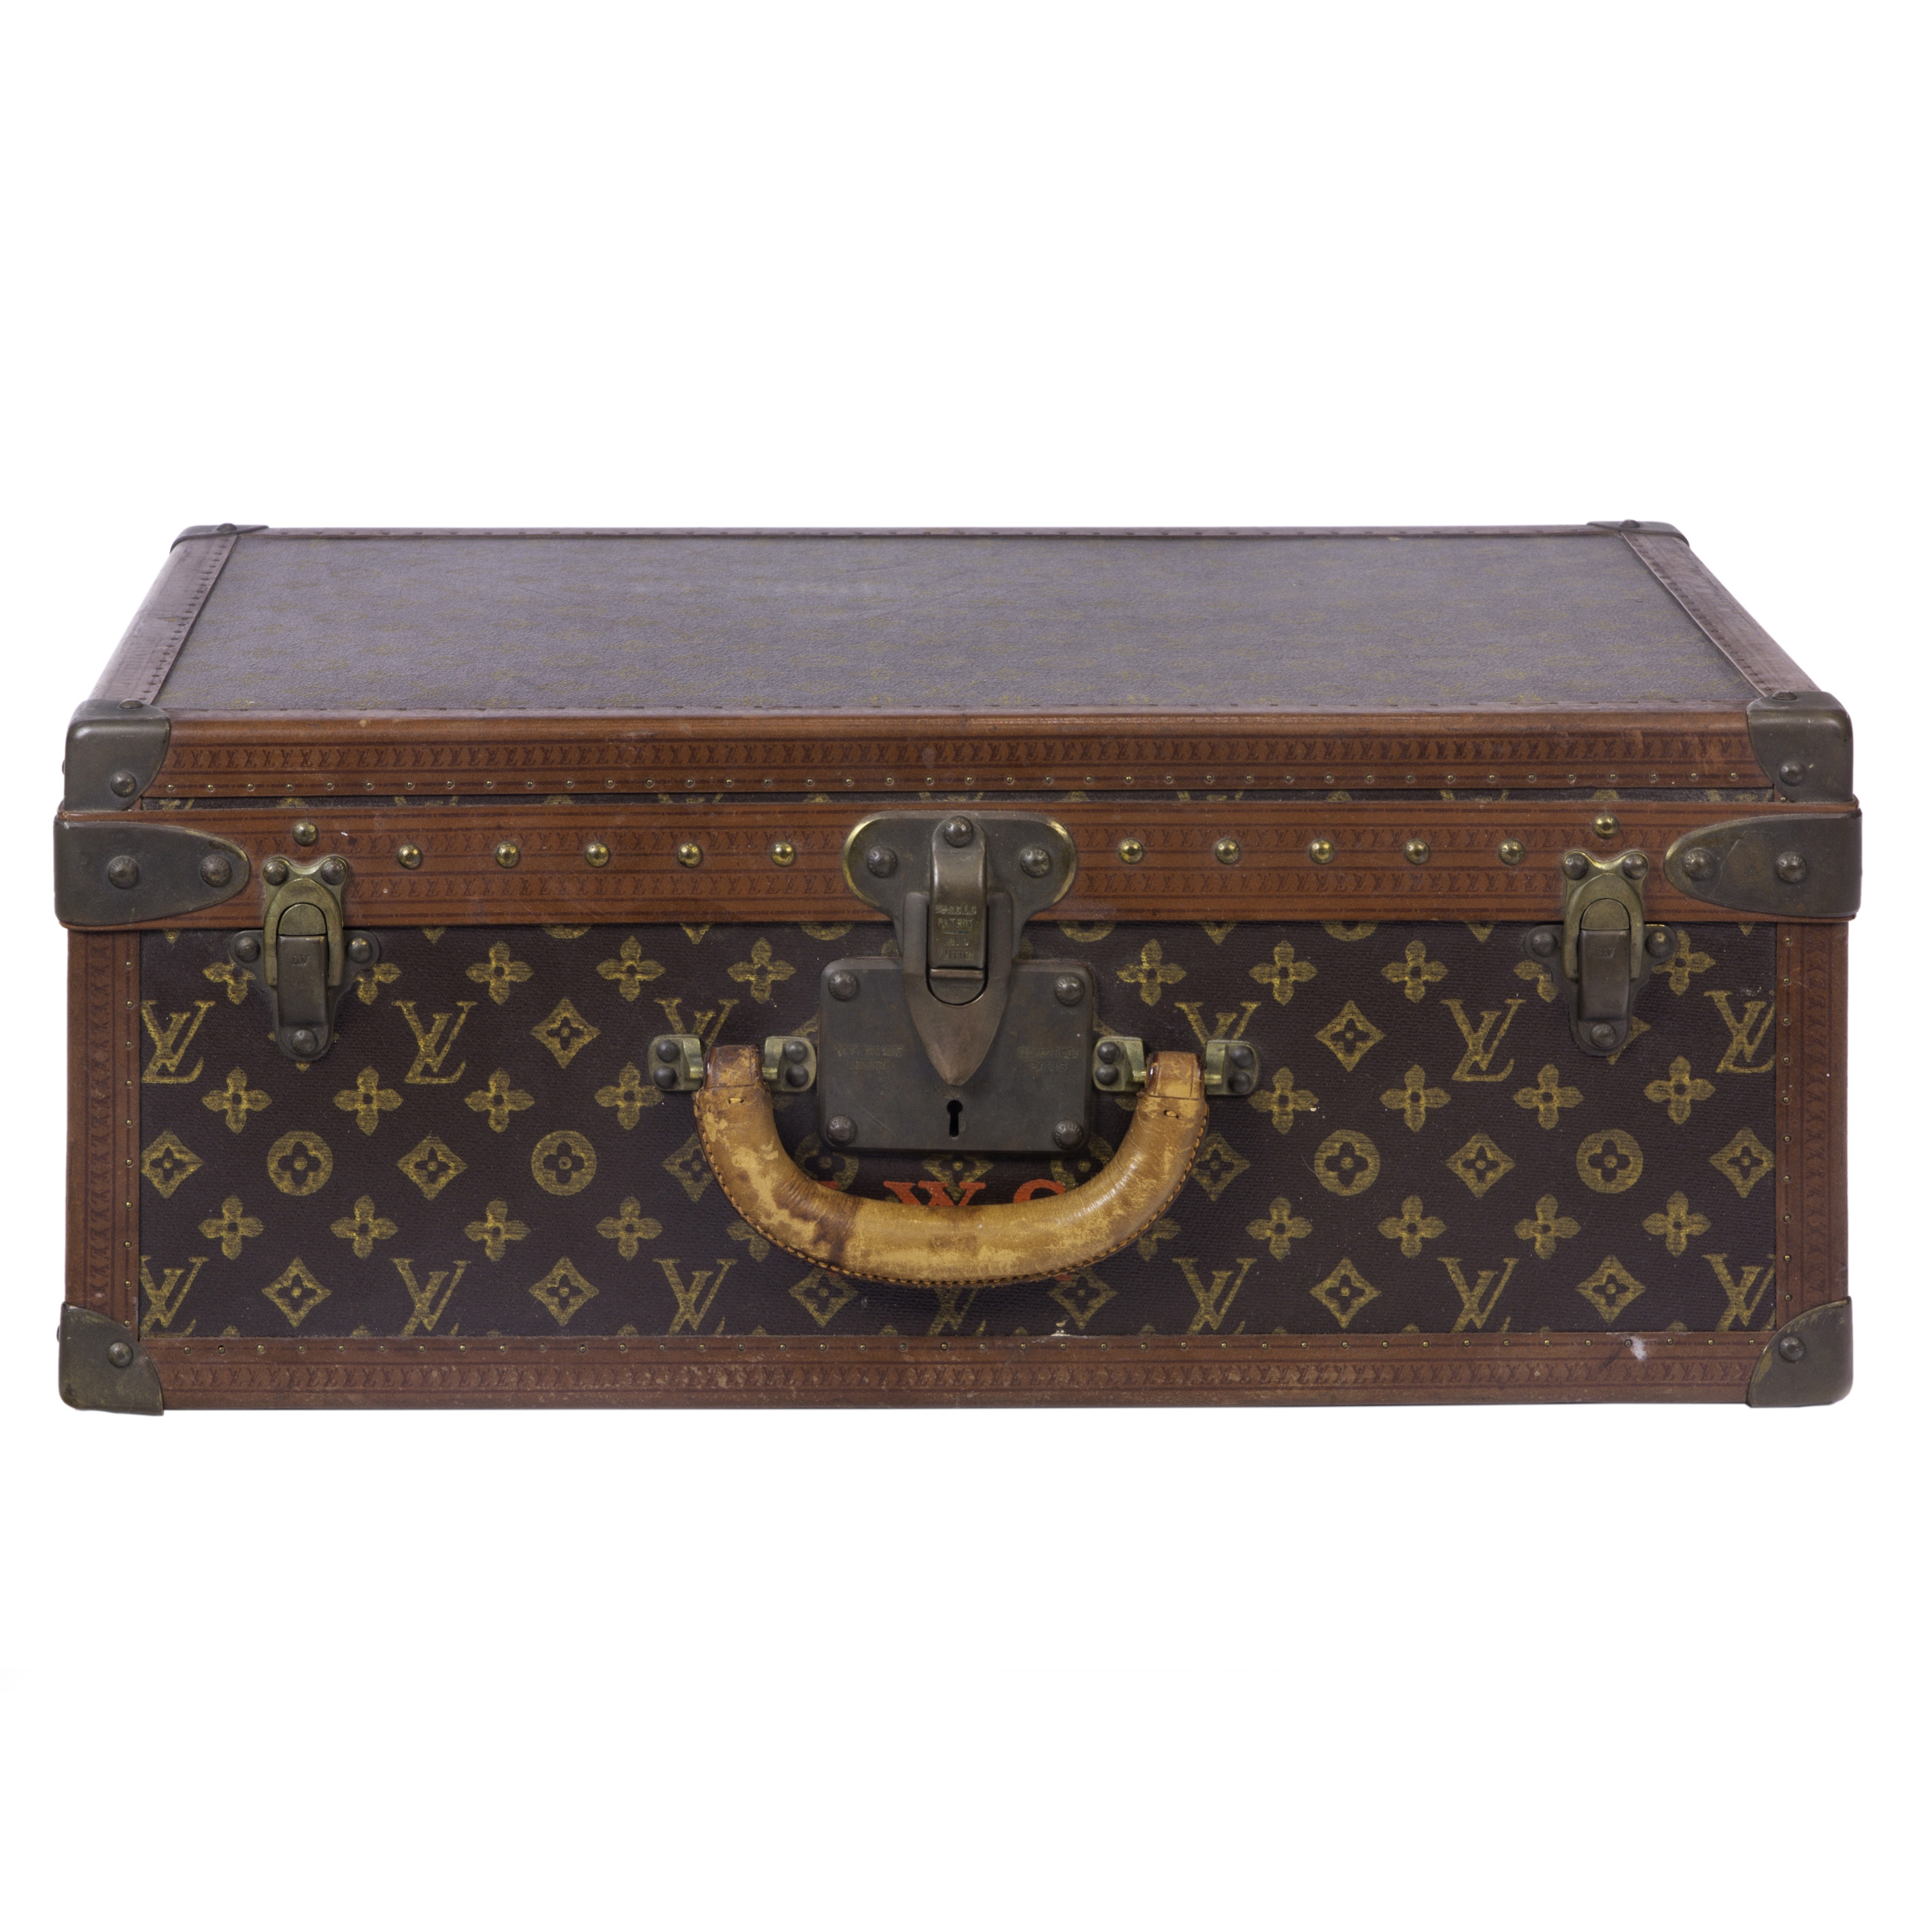 Special Edition Louis Vuitton Epi Luggage Set of Two Hard Cases